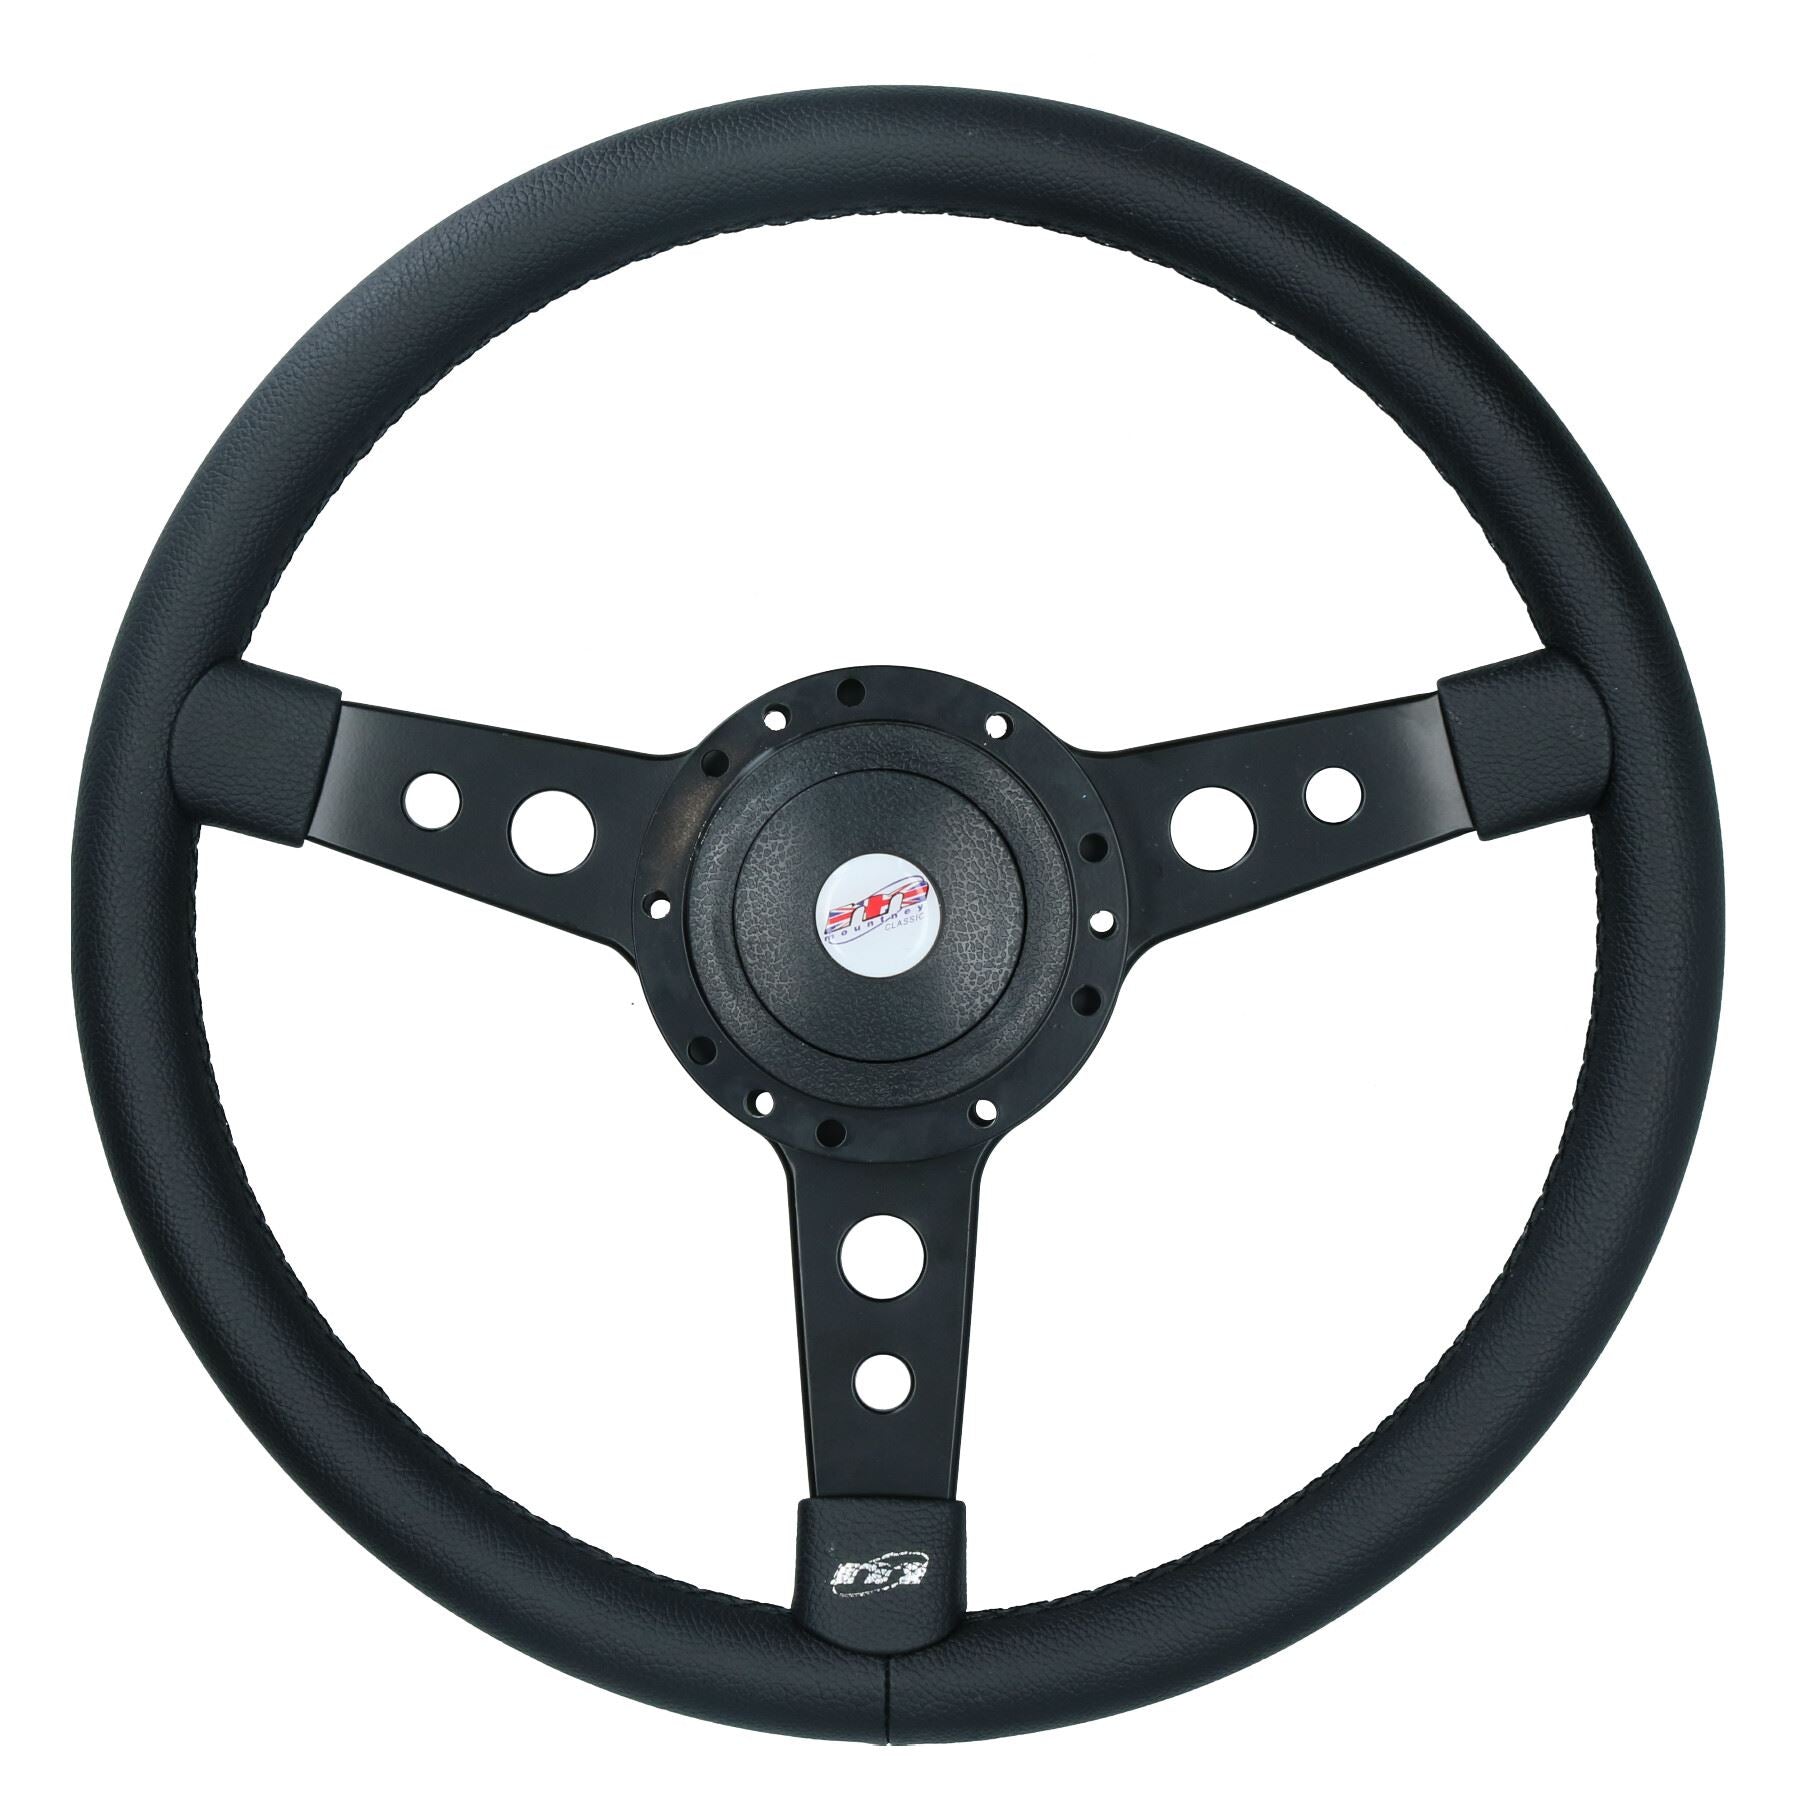 Classic Leather Steering Wheel & Boss to fit Austin Leyland Morris Allegro All Years